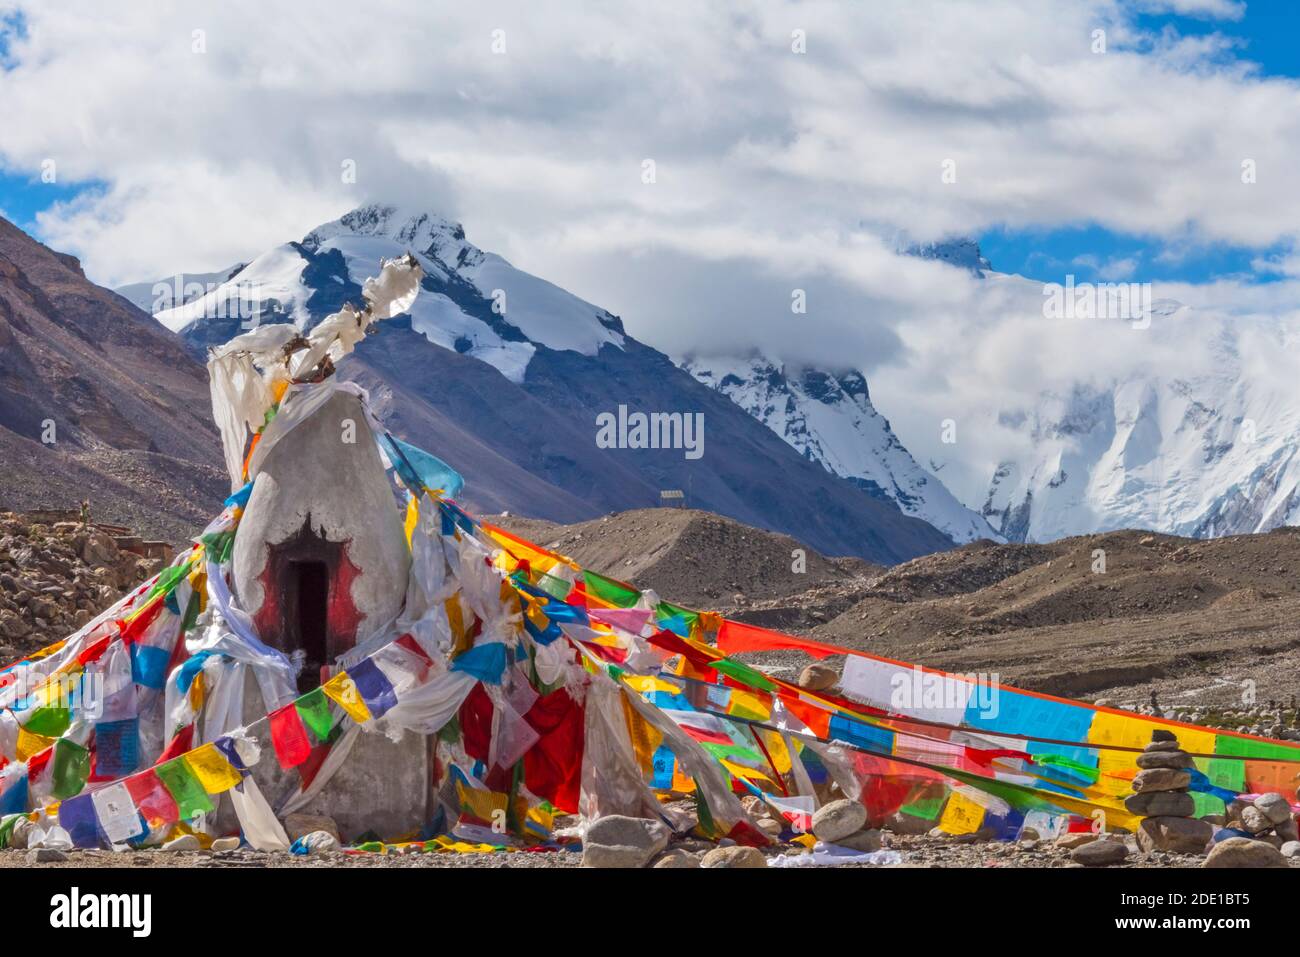 Mani pile and prayer flags in Rongbuk Valley, Lhotse peak (8516m) in the distance, Mt. Everest National Nature Reserve, Shigatse Prefecture, Tibet, Ch Stock Photo